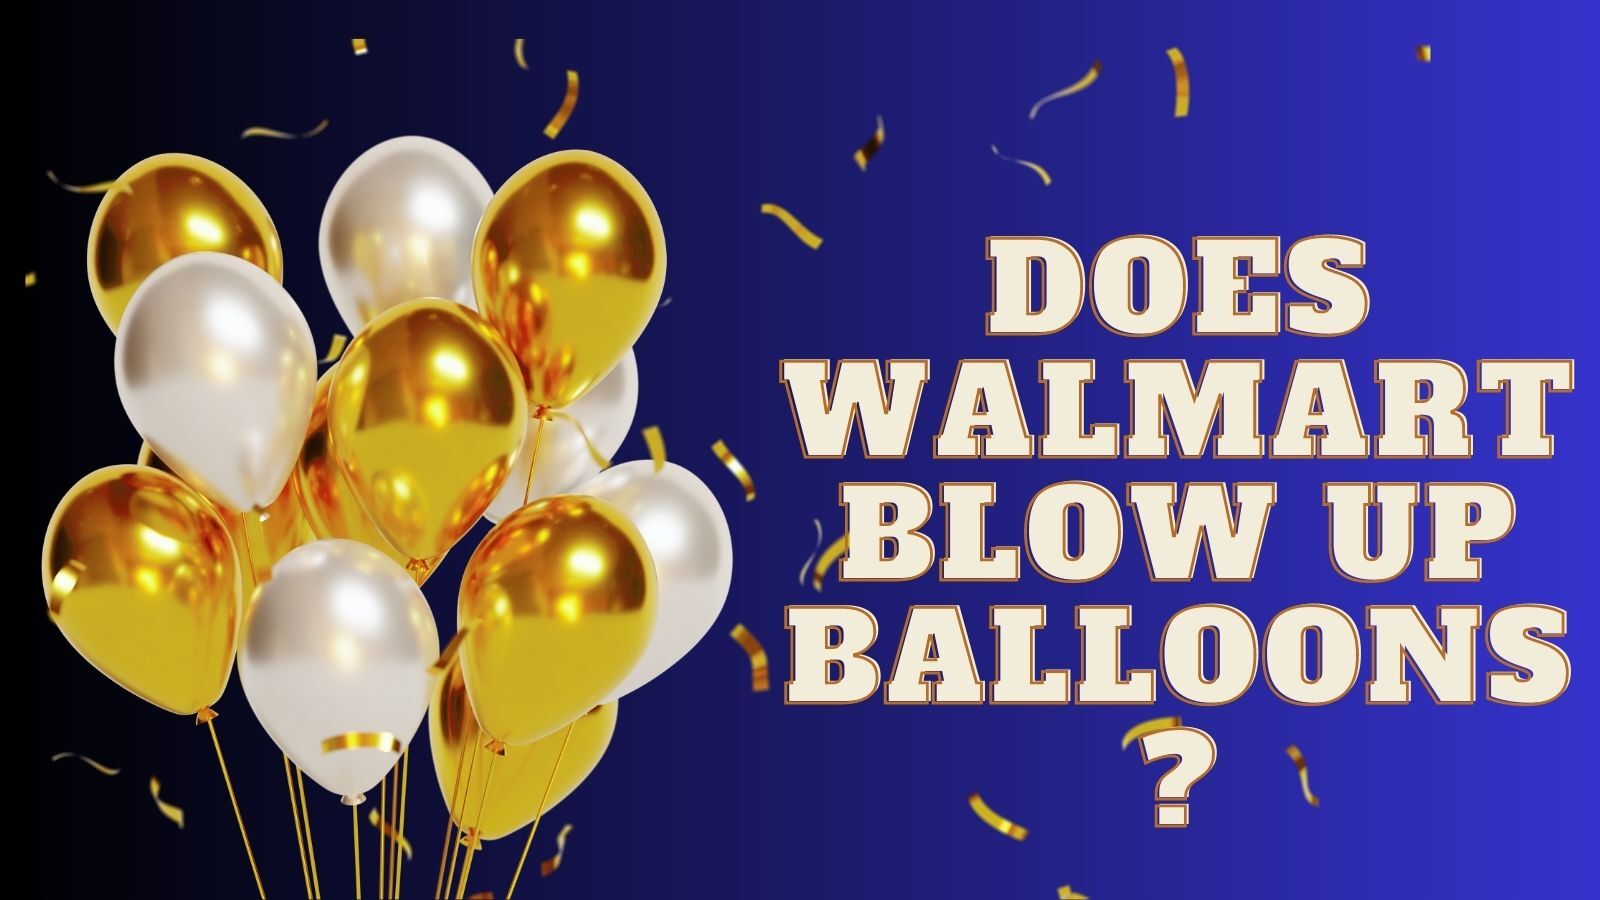 Does Walmart Blow Up Balloons? (Yes, More Details that You Want to Know)